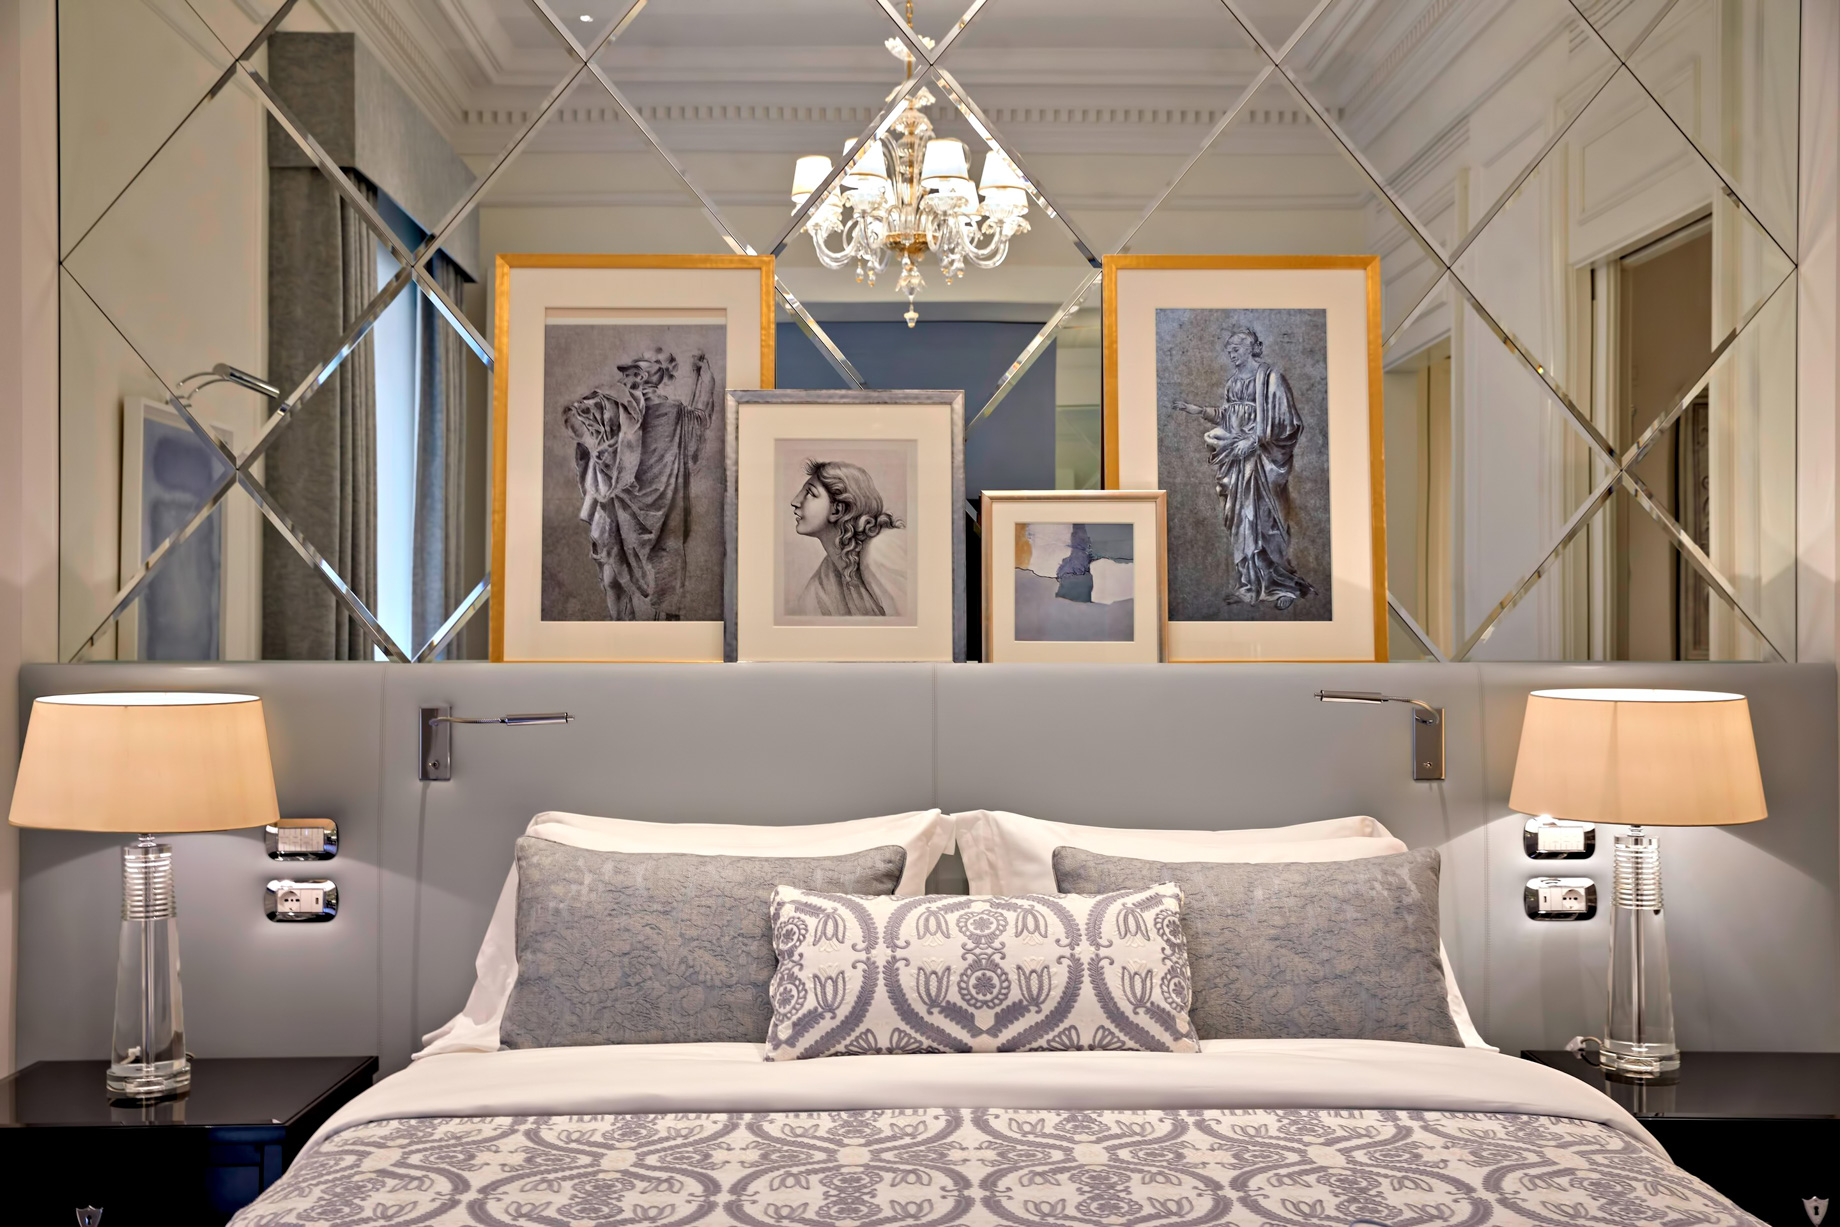 The St. Regis Rome Hotel - Rome, Italy - Superior Room King